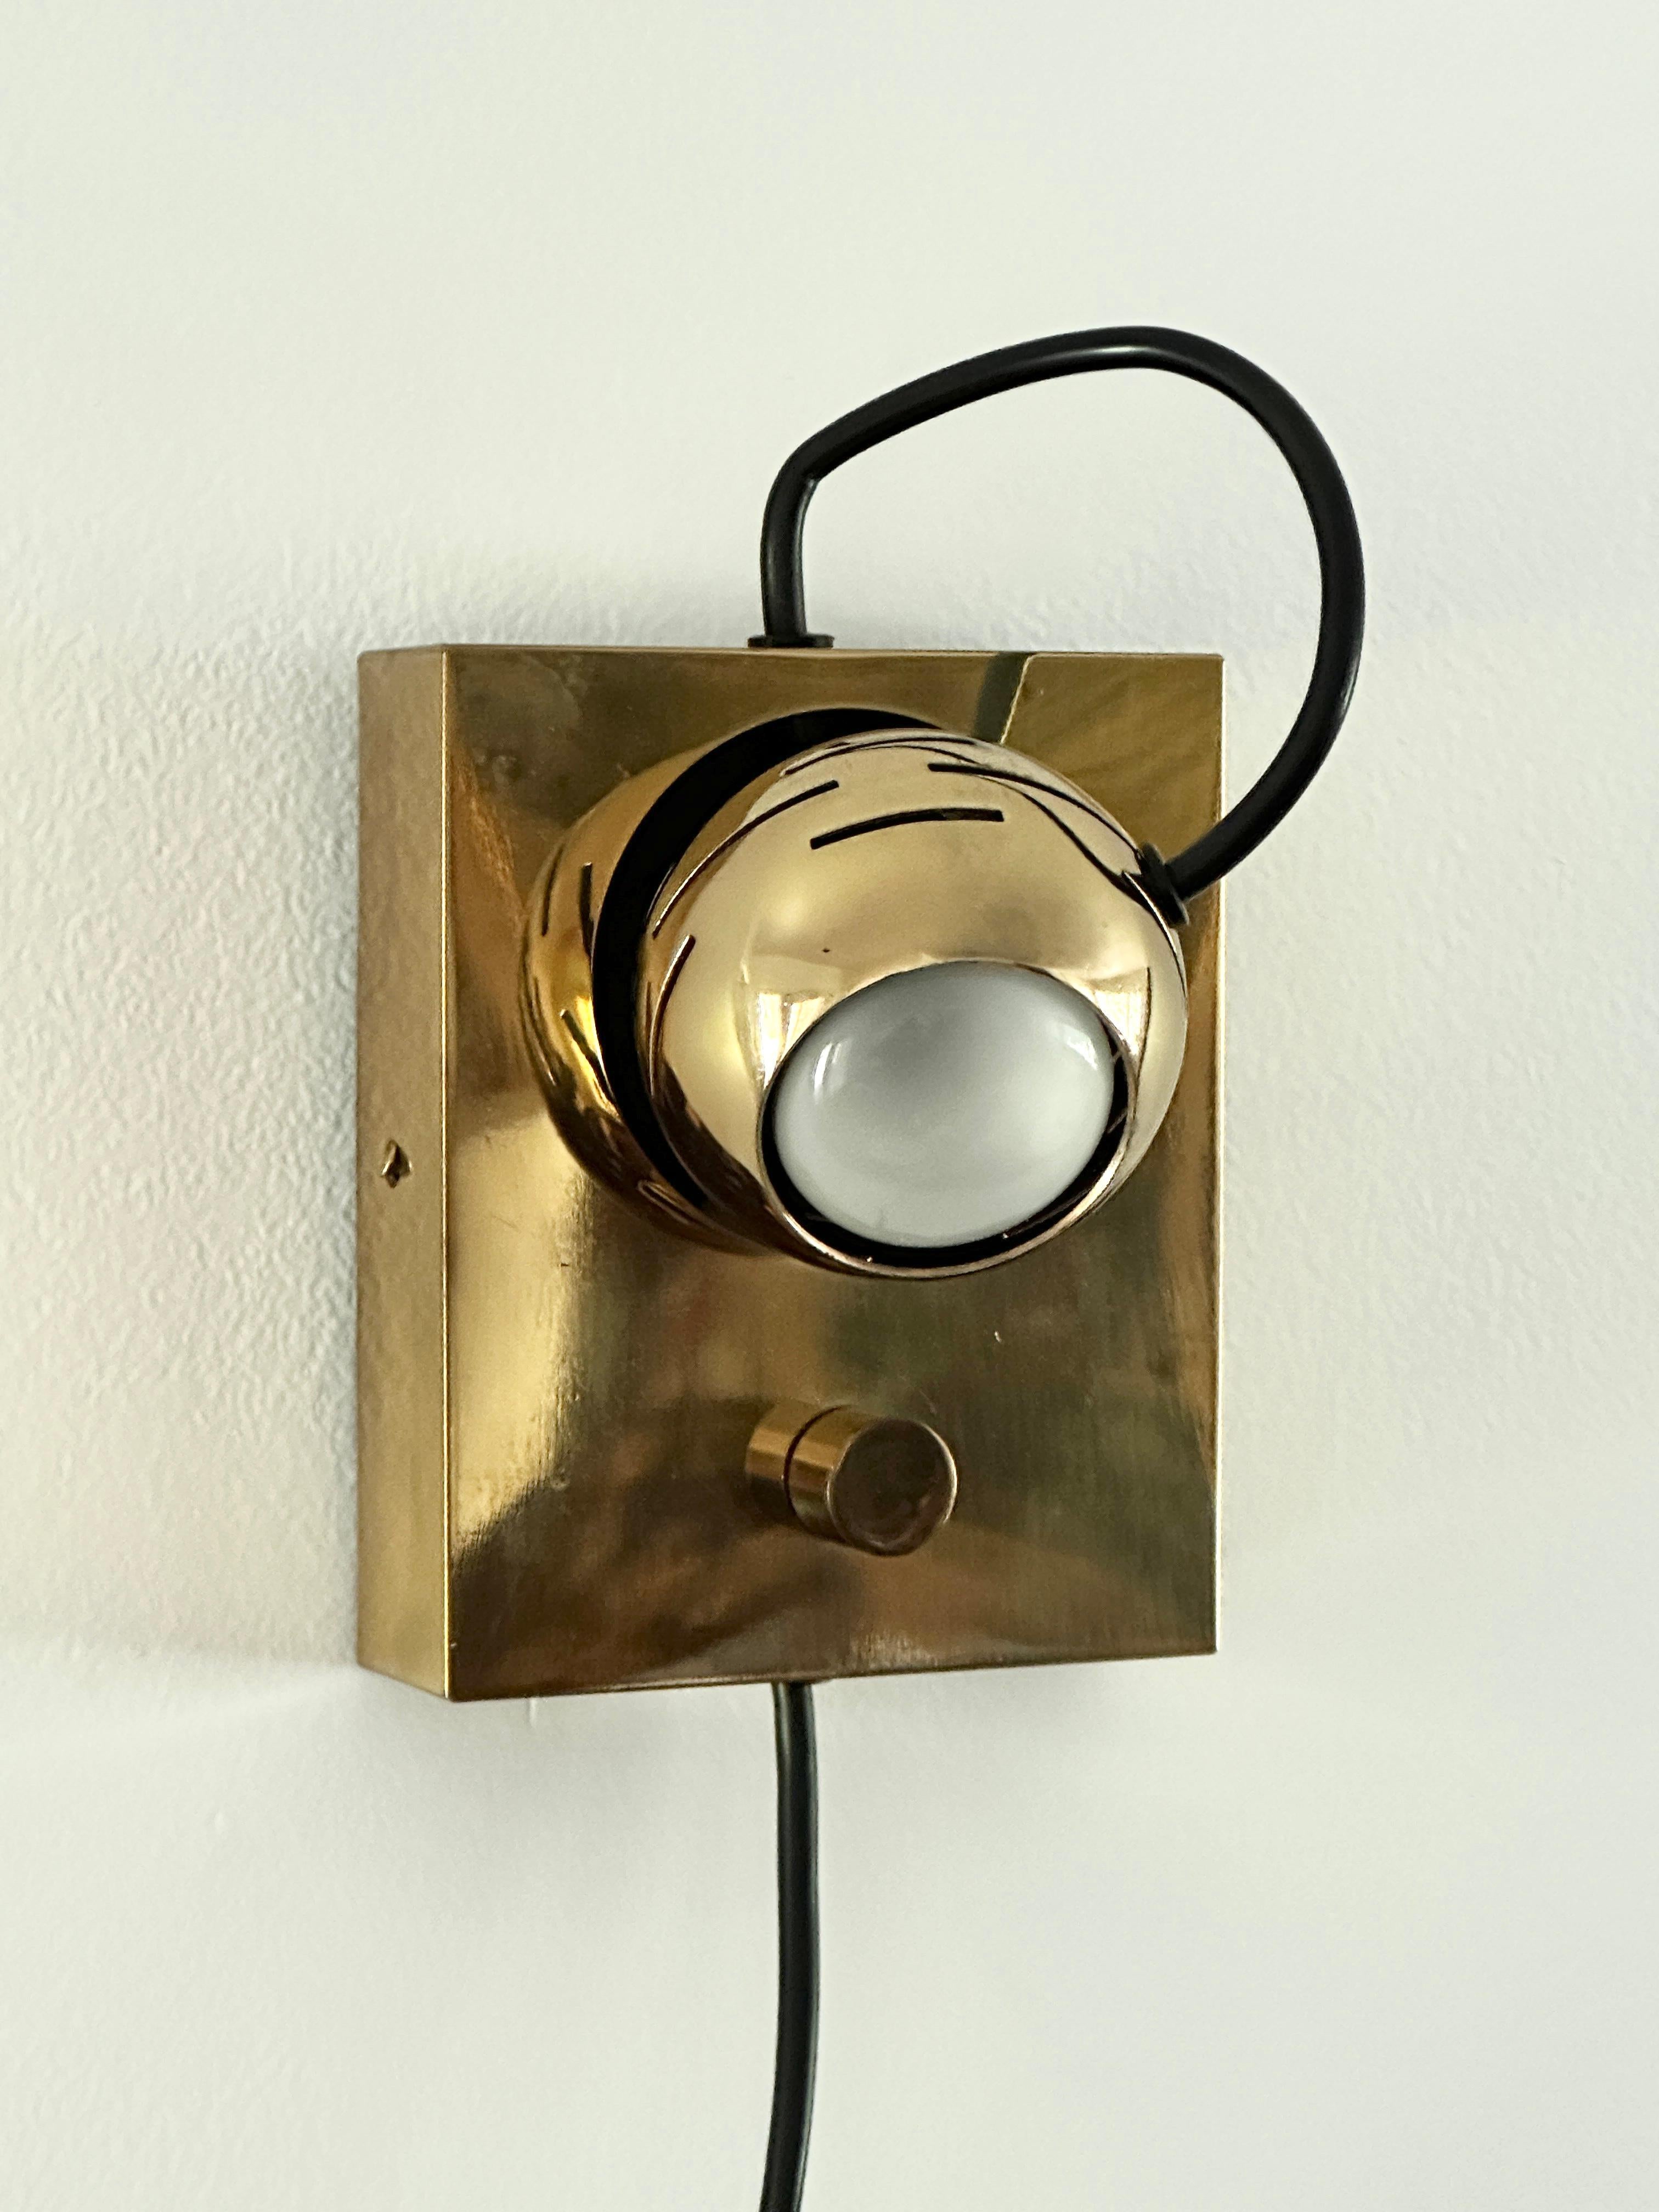 An adjustable “Eyeball” Lamp which was designed as an “Arredoluce Technical Study”, similar to the two “eyeball” wall fixture designed by Angelo Lelli. The lamp was manufacture by Arredoluce, made in Italy, and distributed in the United States by